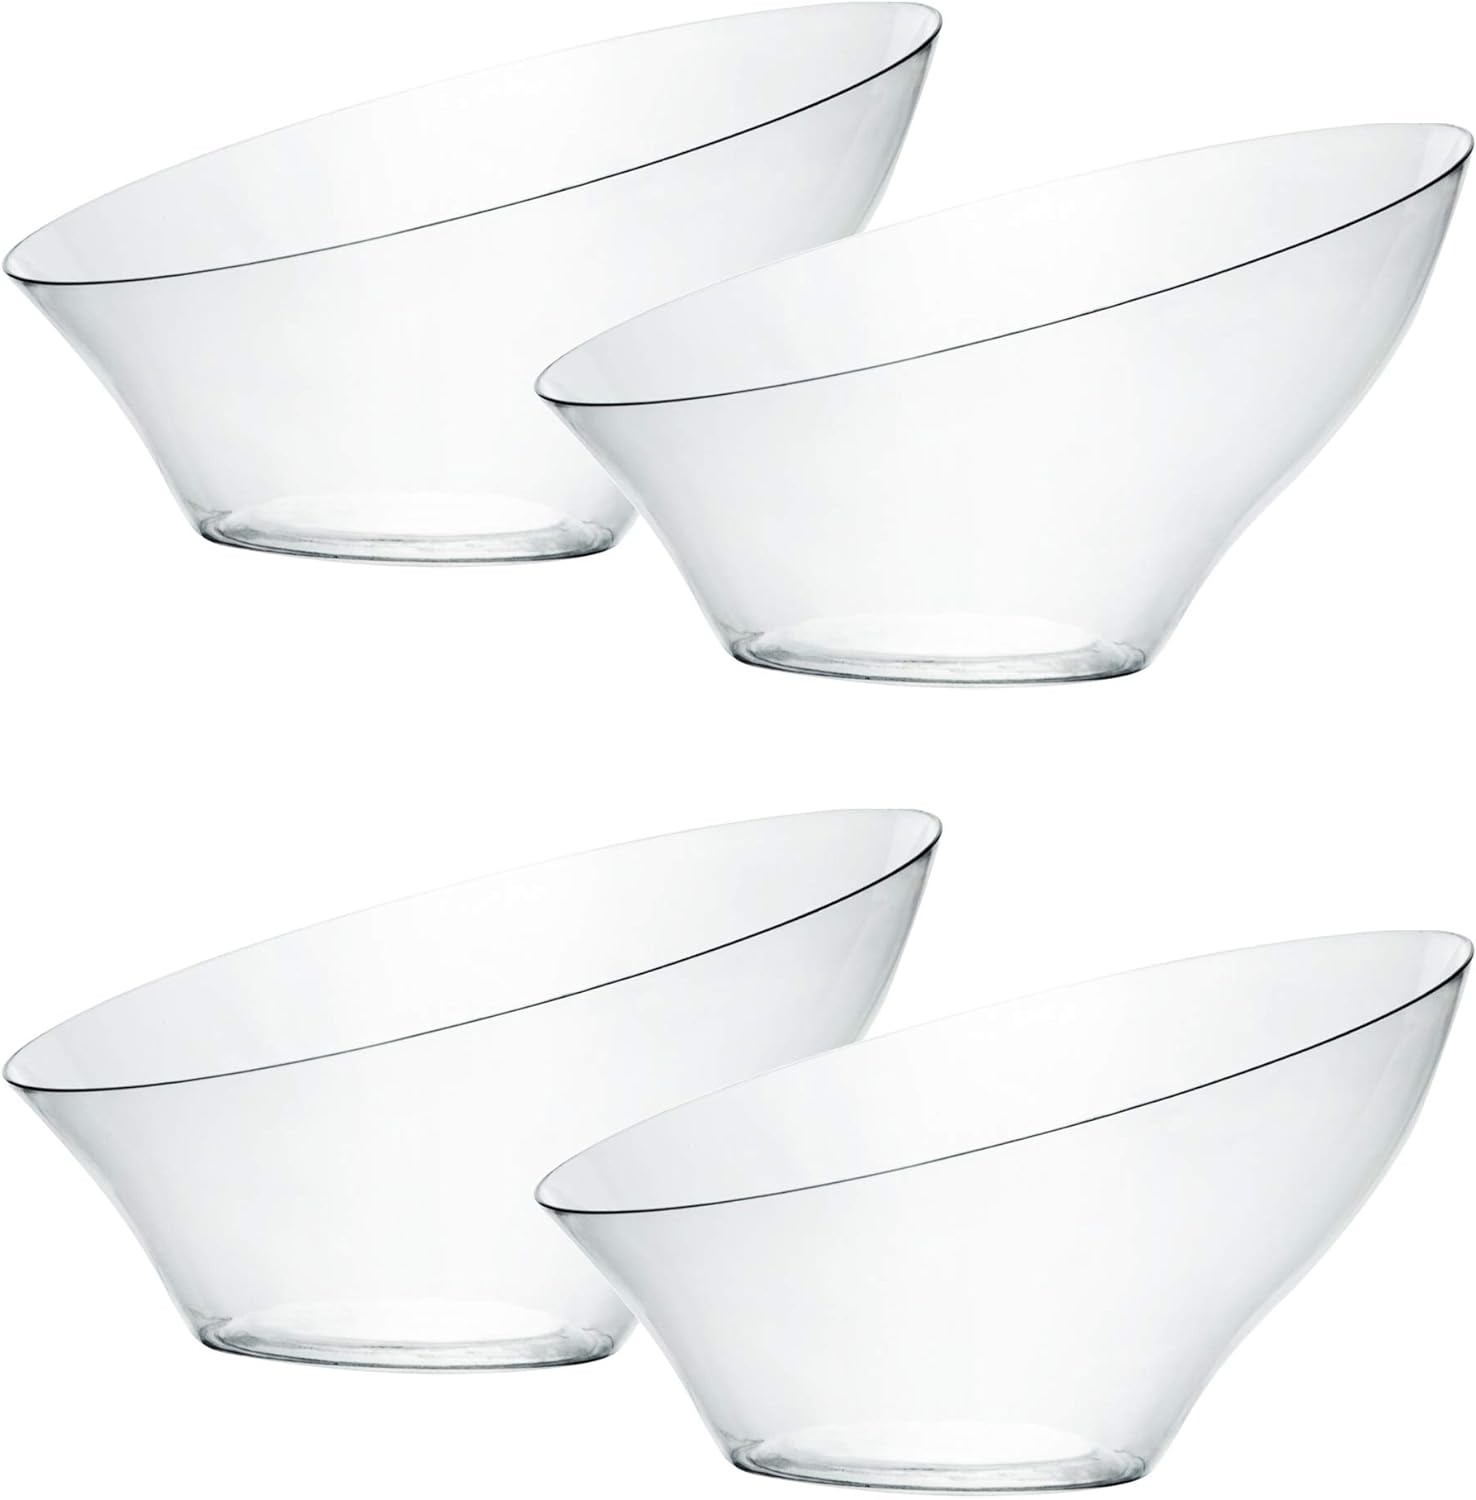 PLASTICPRO Disposable Angled Plastic Bowls Round Small Serving Bowl, Elegant for Party', Snack, or Salad Bowl, Clear Pack of 8